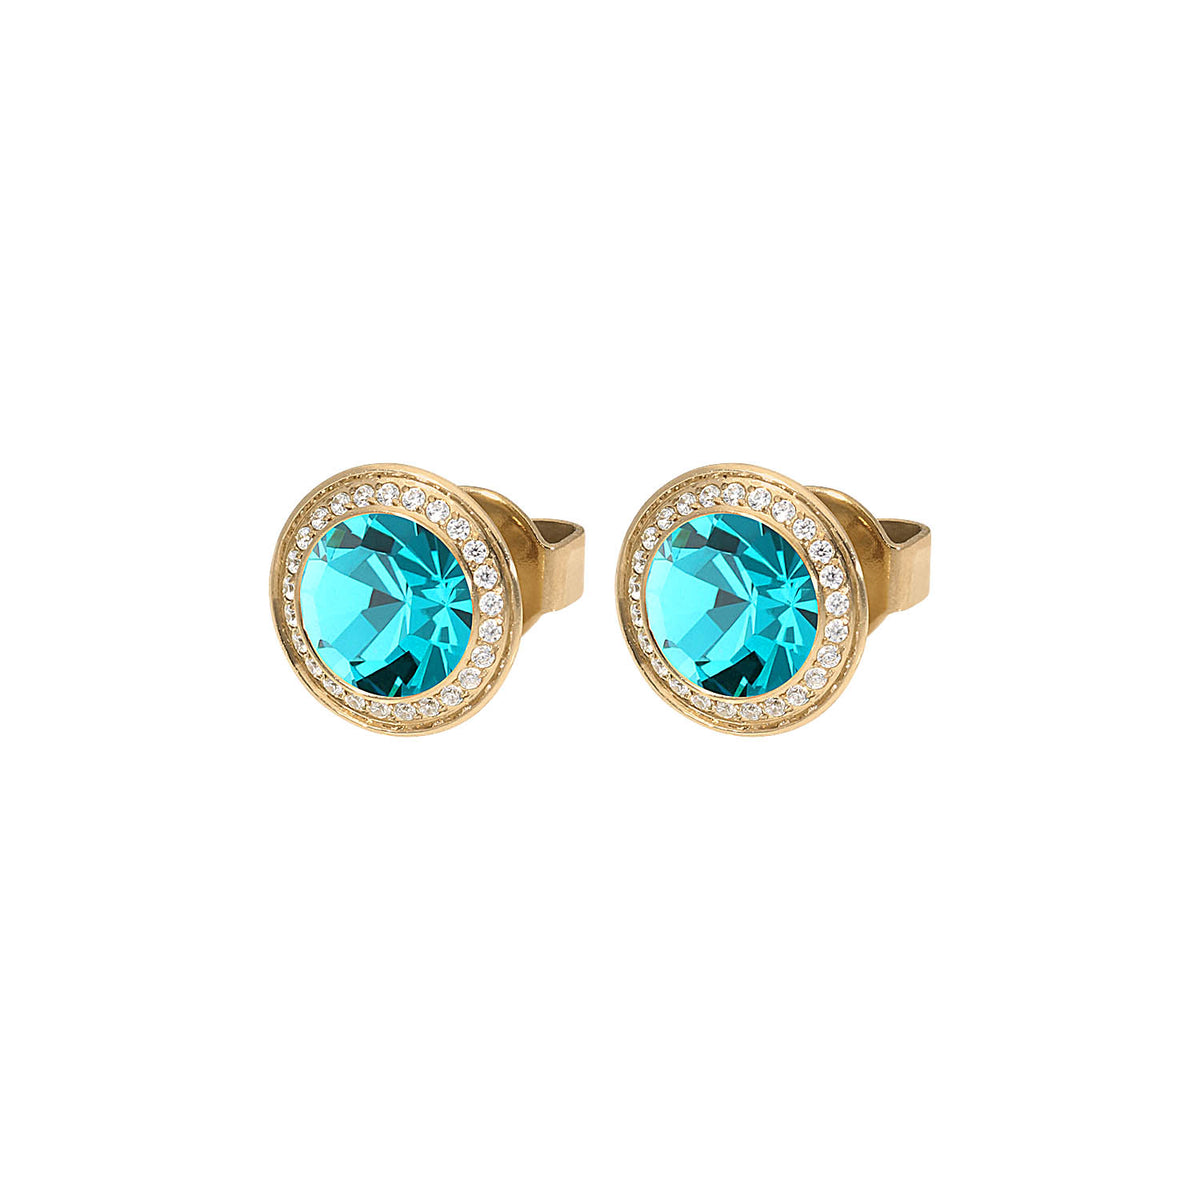 Tondo Deluxe Ear Studs 9mm - Gold